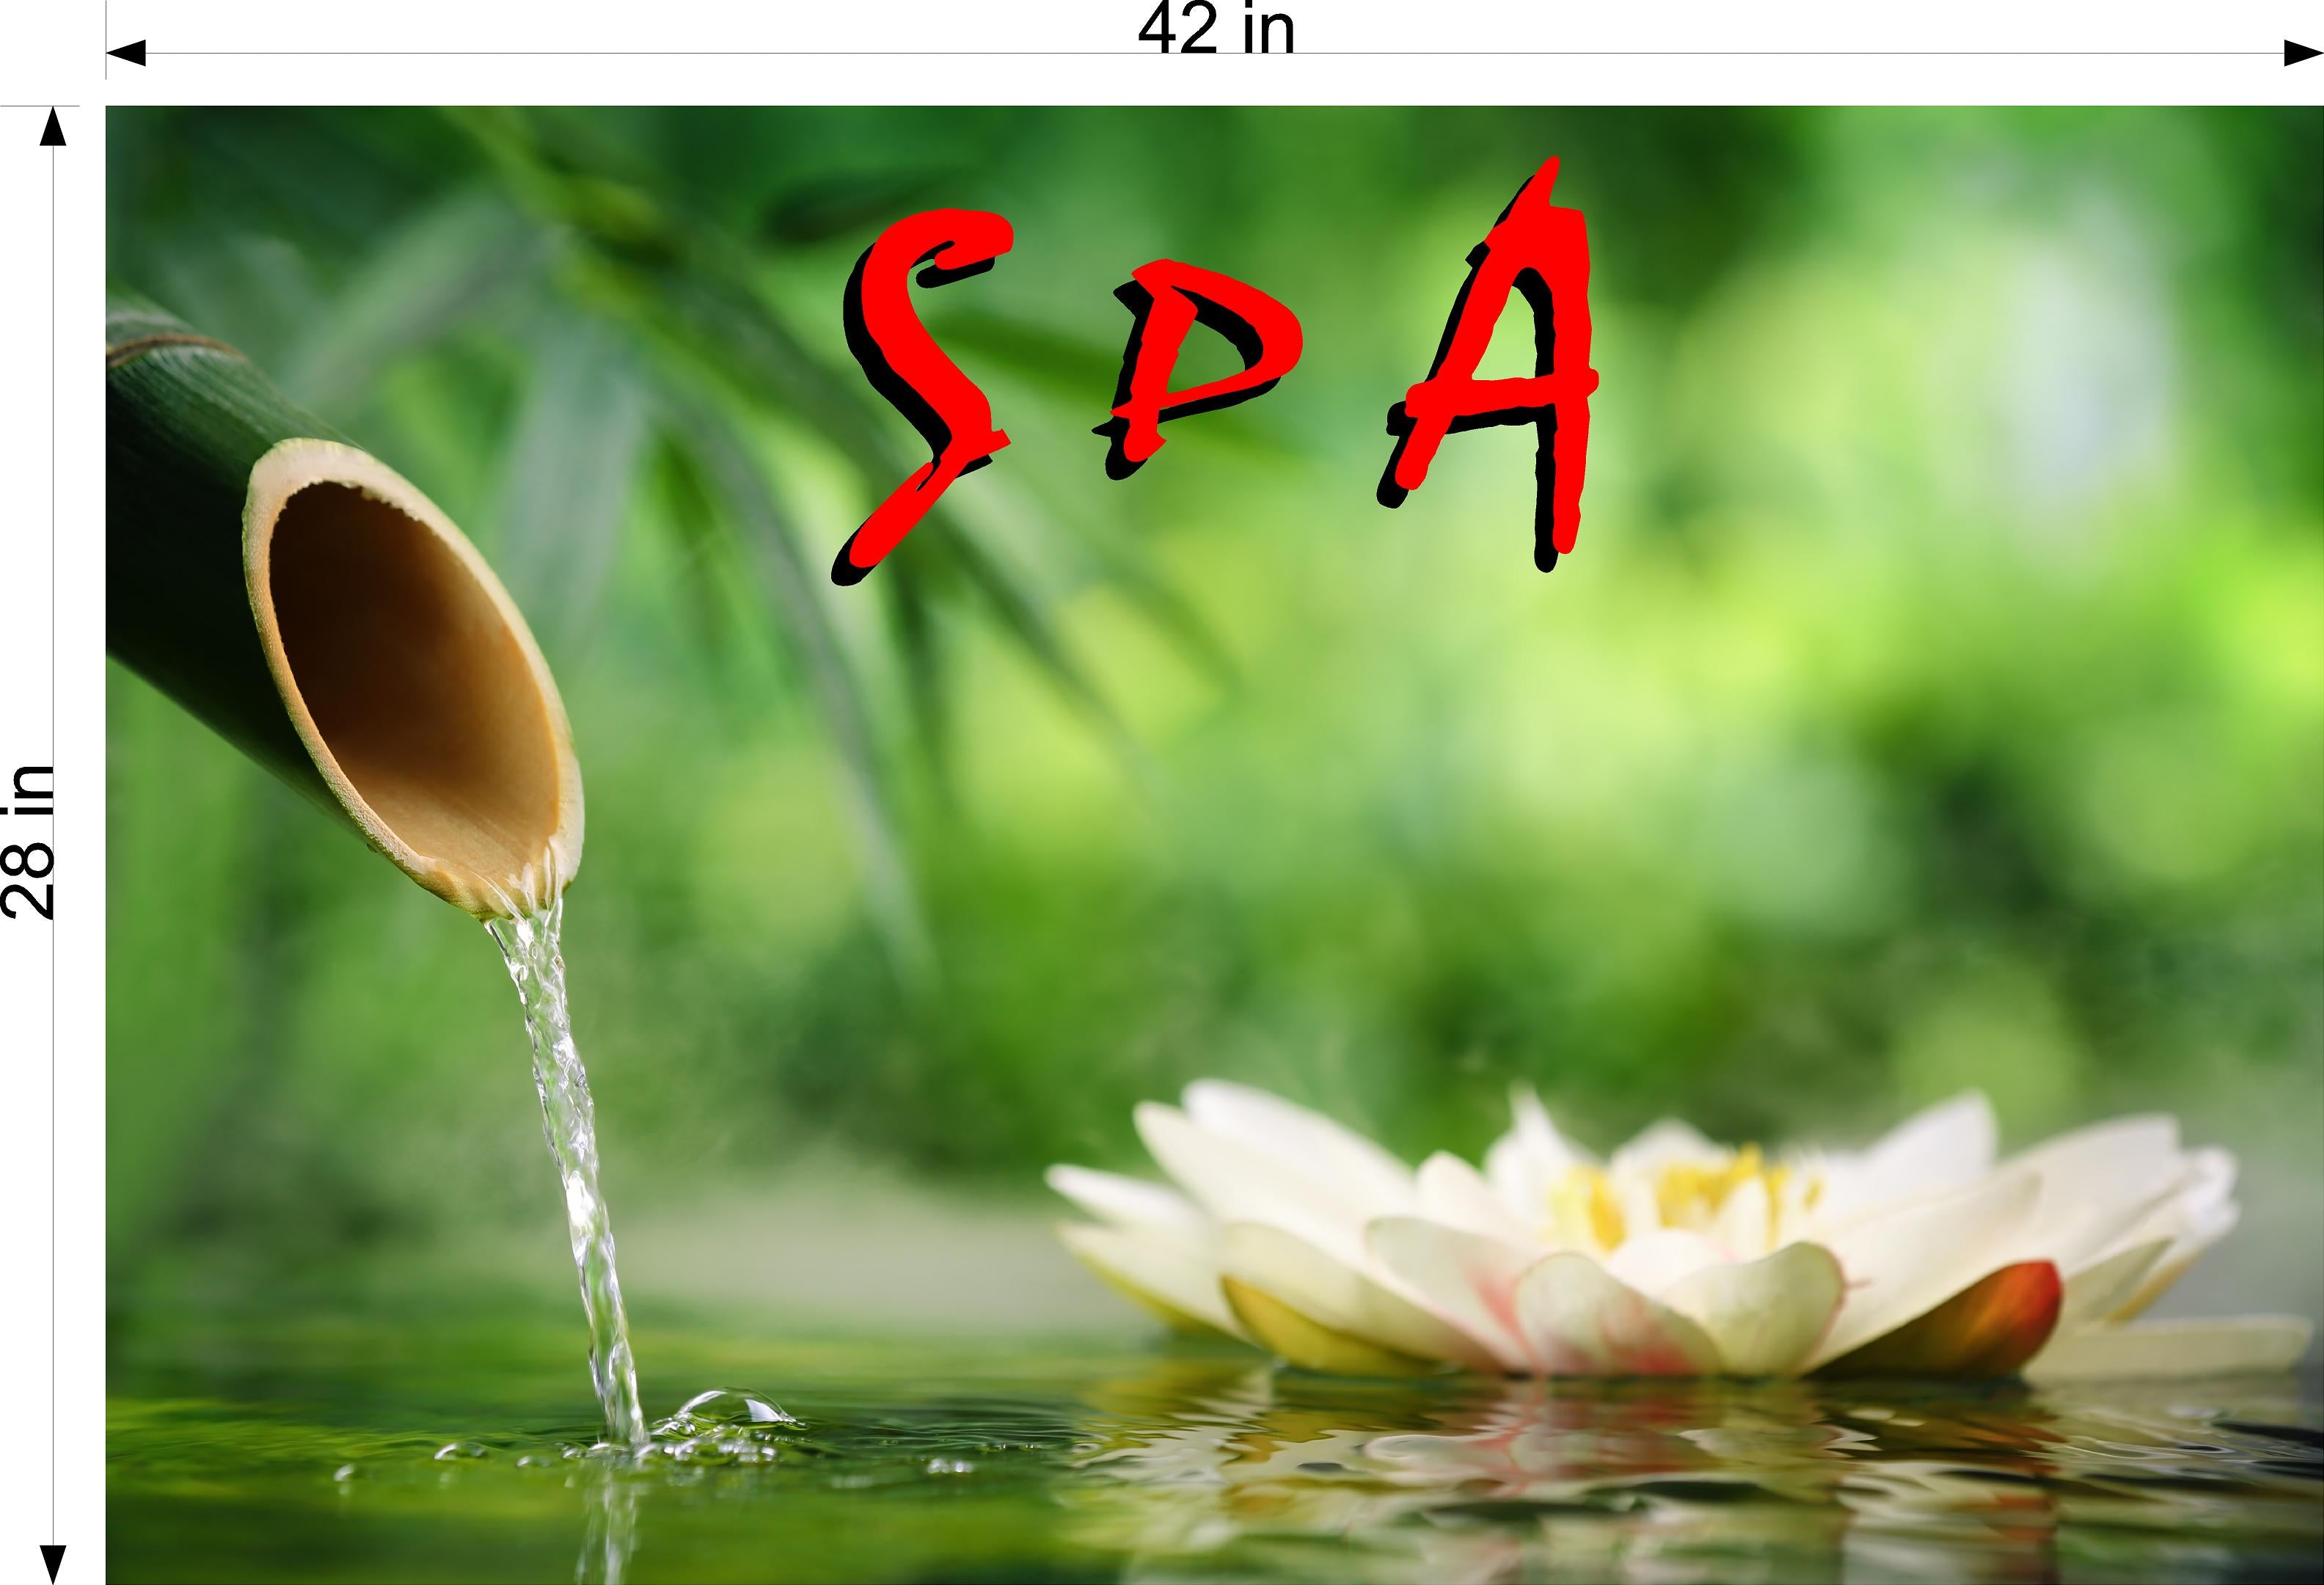 Spa 03 Wallpaper Poster Decal with Adhesive Backing Wall Sticker Decor Indoors Interior Sign Horizontal